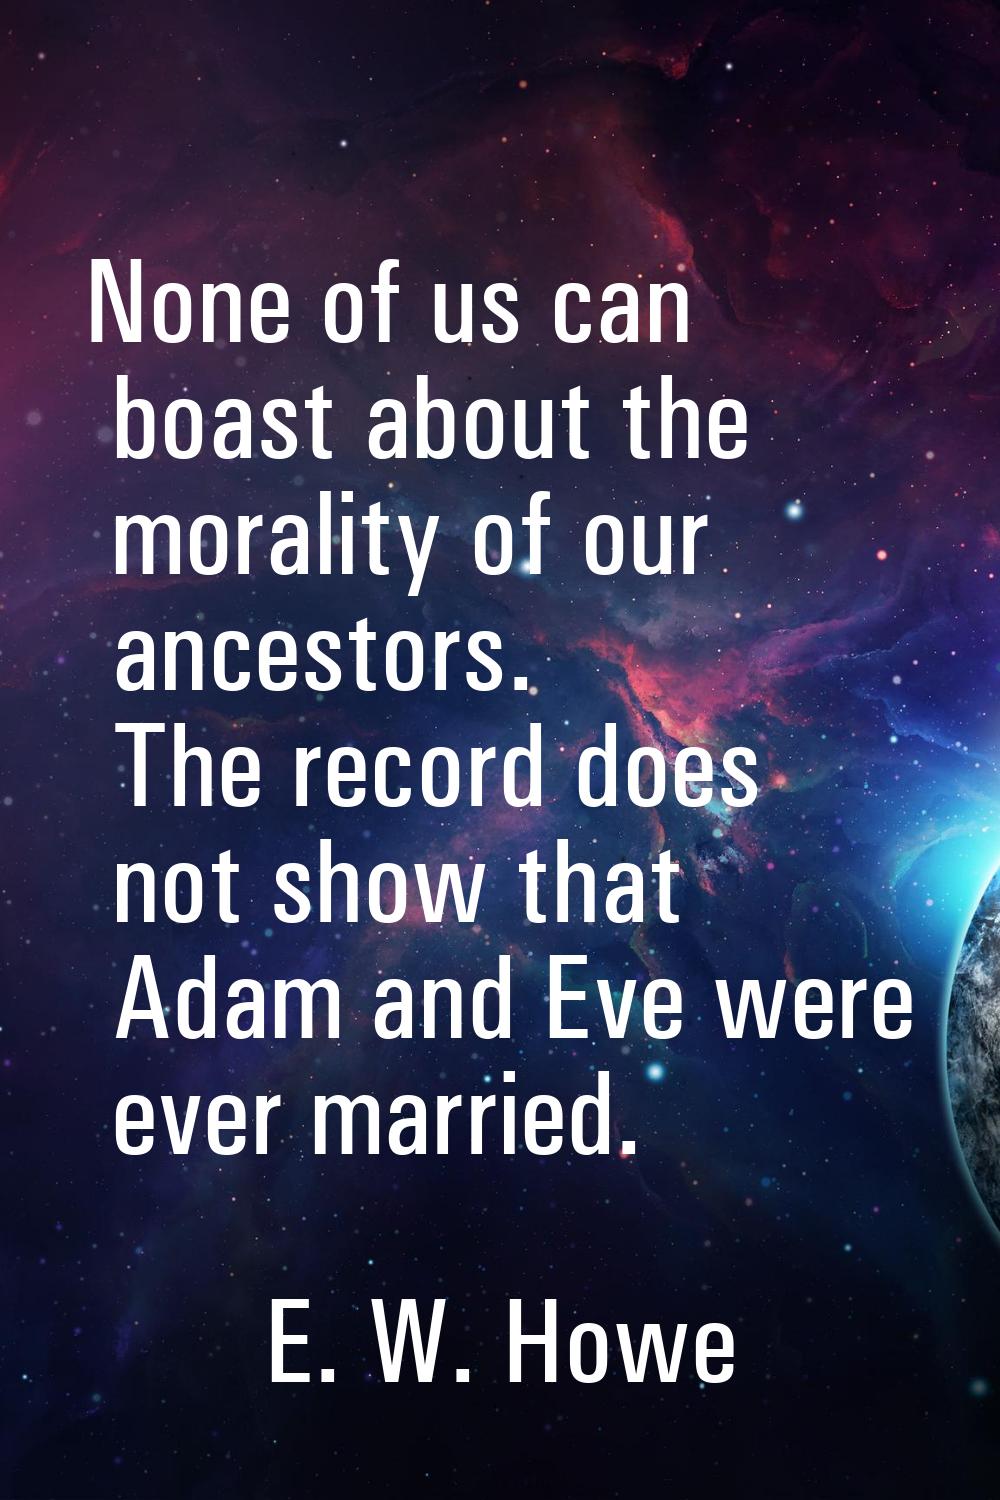 None of us can boast about the morality of our ancestors. The record does not show that Adam and Ev